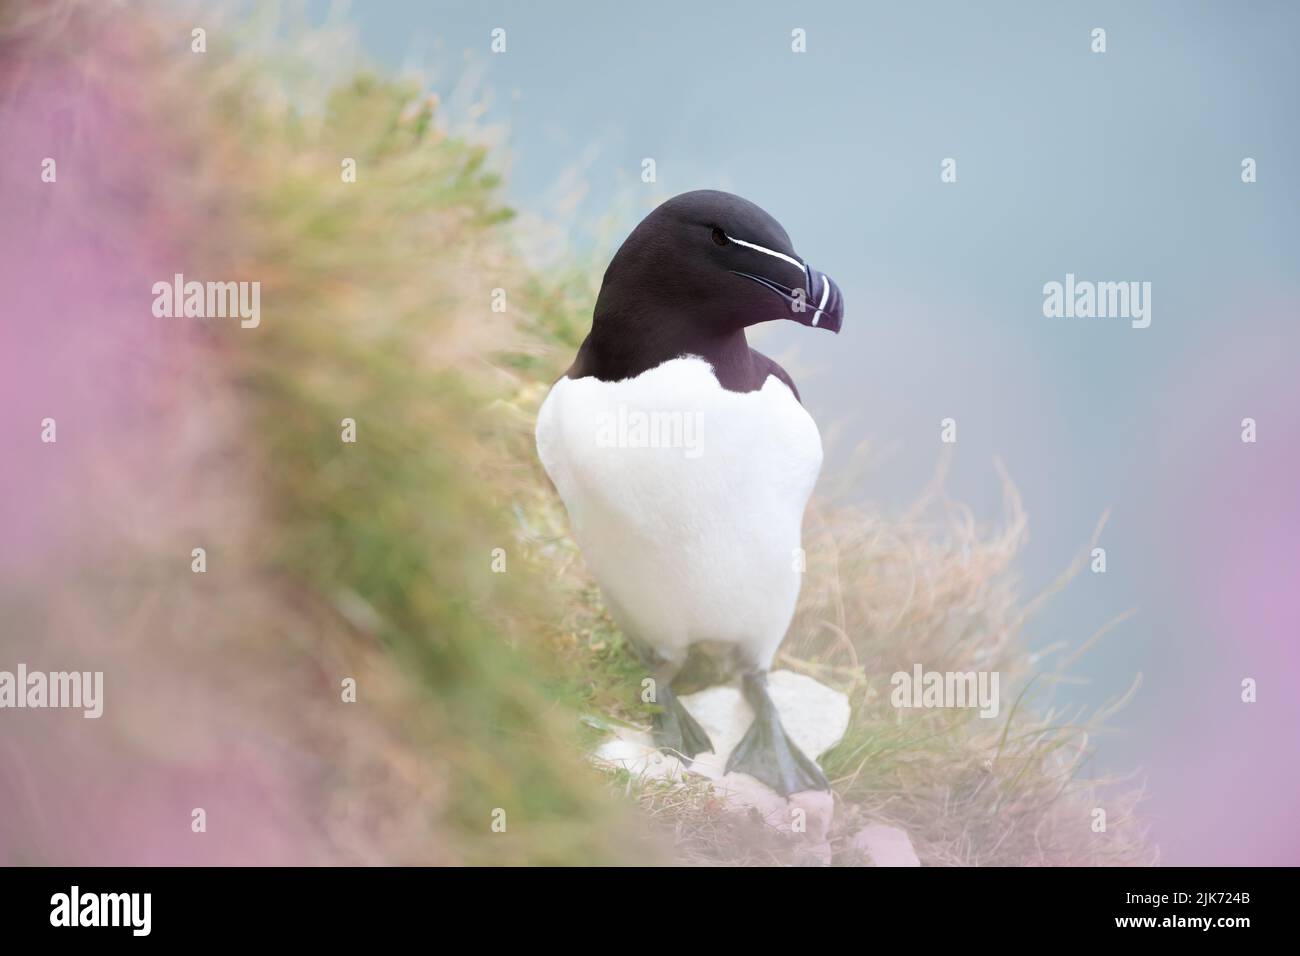 Close up of a Razorbill in Bempton cliffs among pink campion flowers in spring. Stock Photo